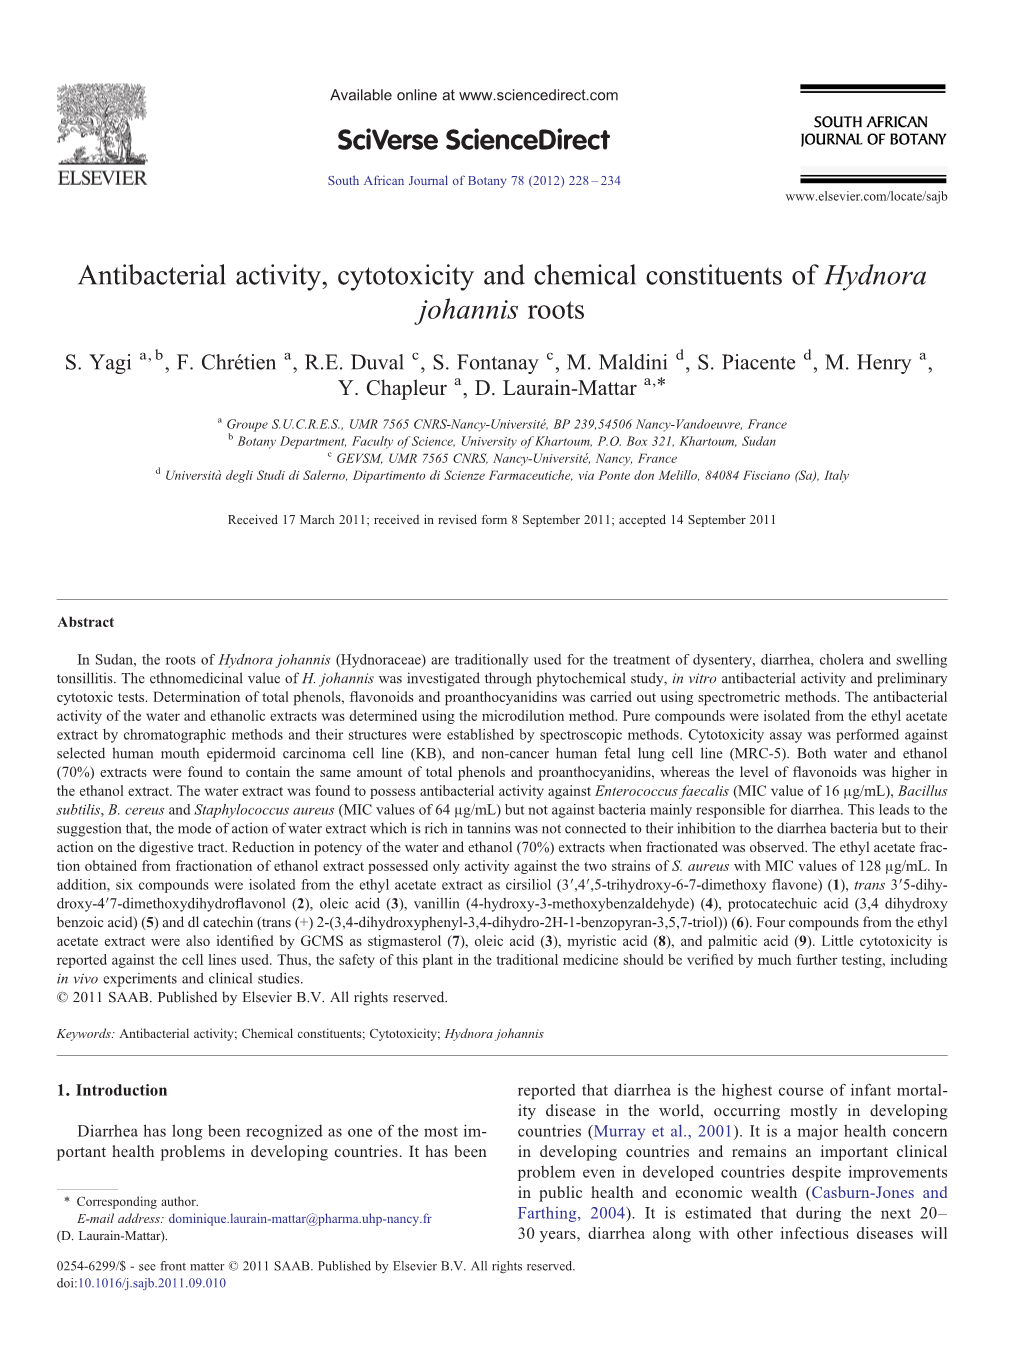 Antibacterial Activity, Cytotoxicity and Chemical Constituents of Hydnora Johannis Roots